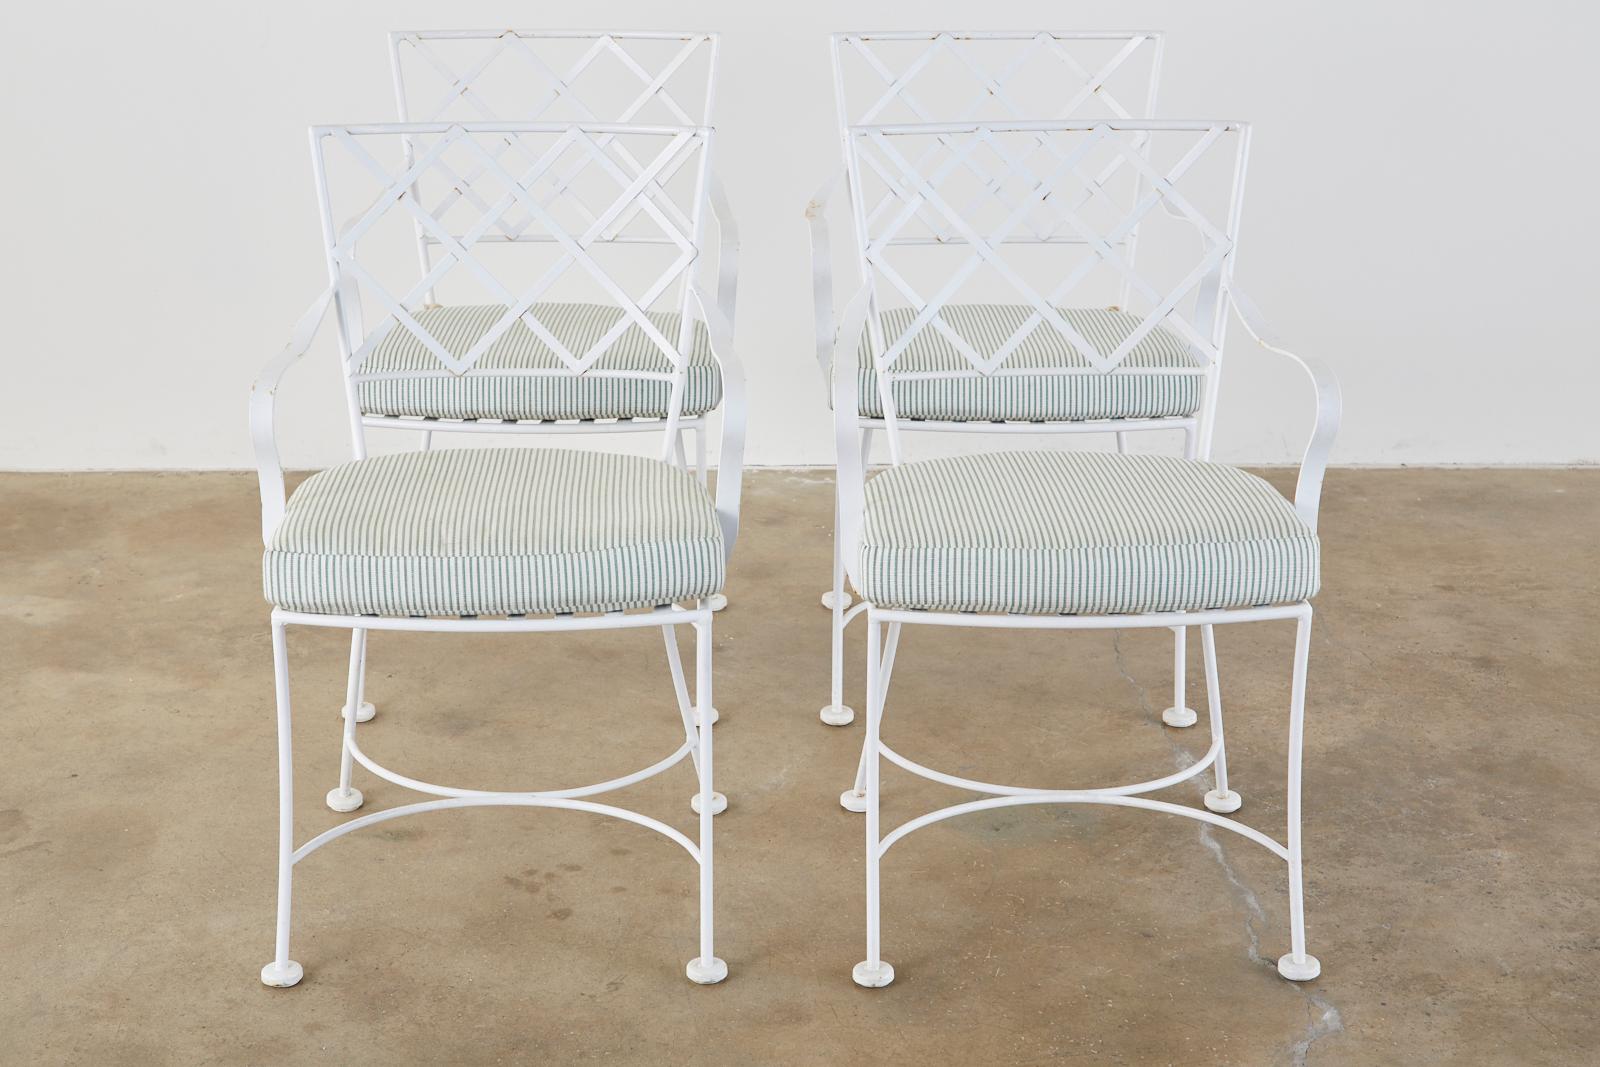 American Set of Four Neoclassical Style Iron Garden Dining Chairs